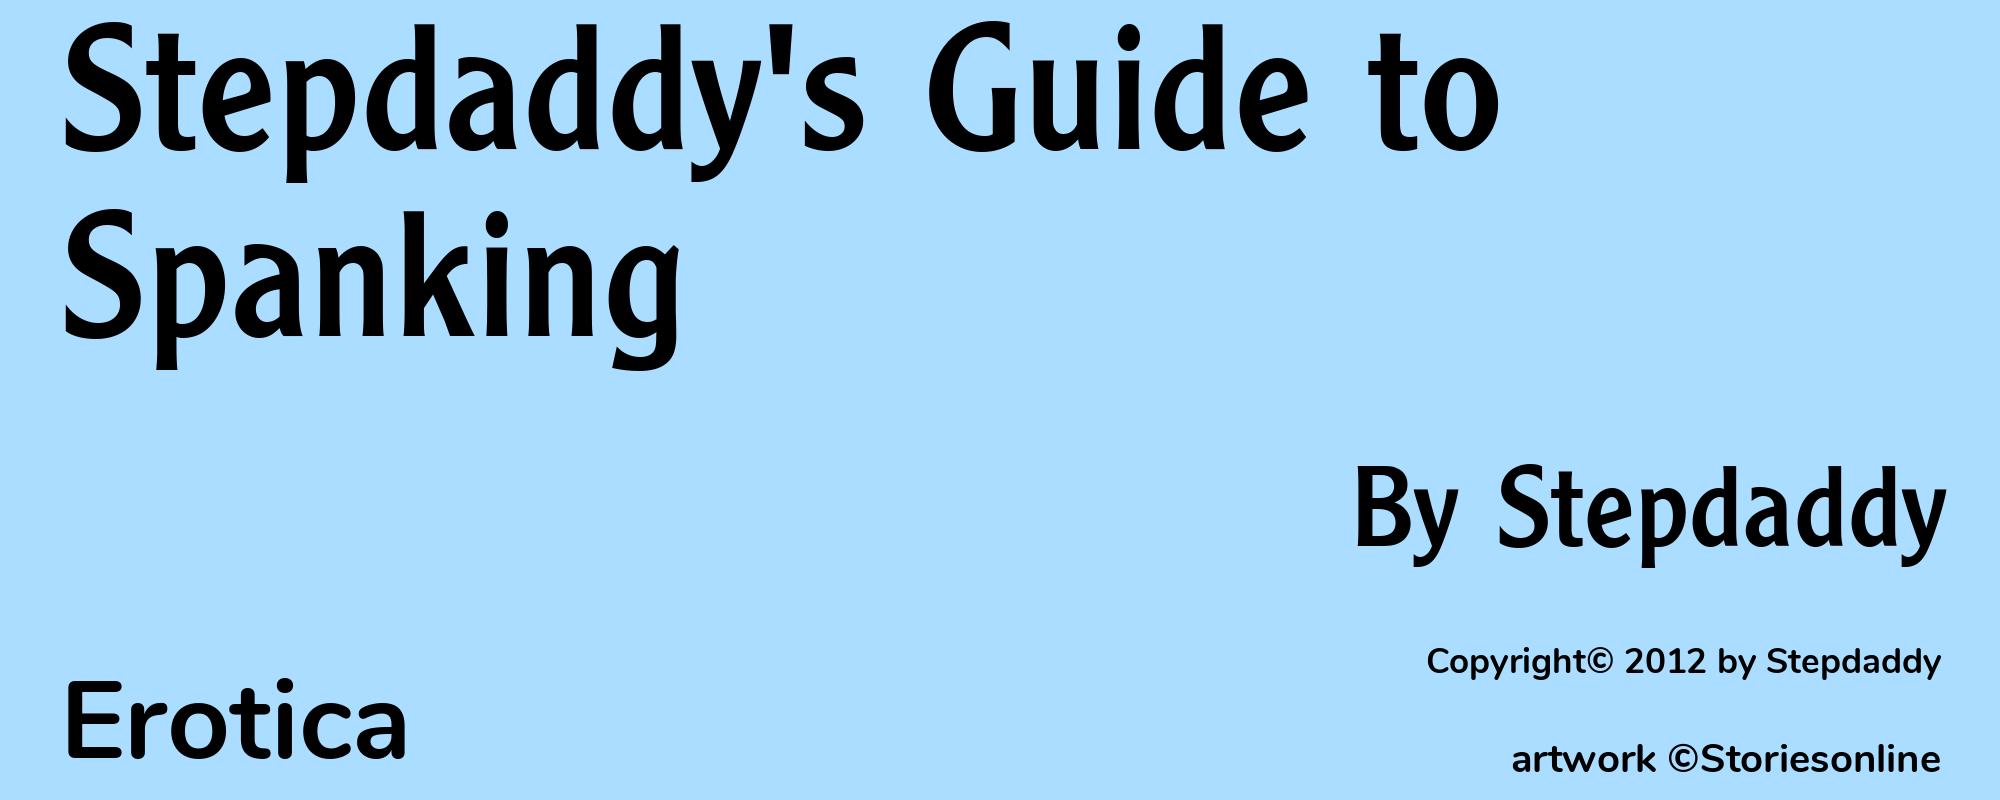 Stepdaddy's Guide to Spanking - Cover